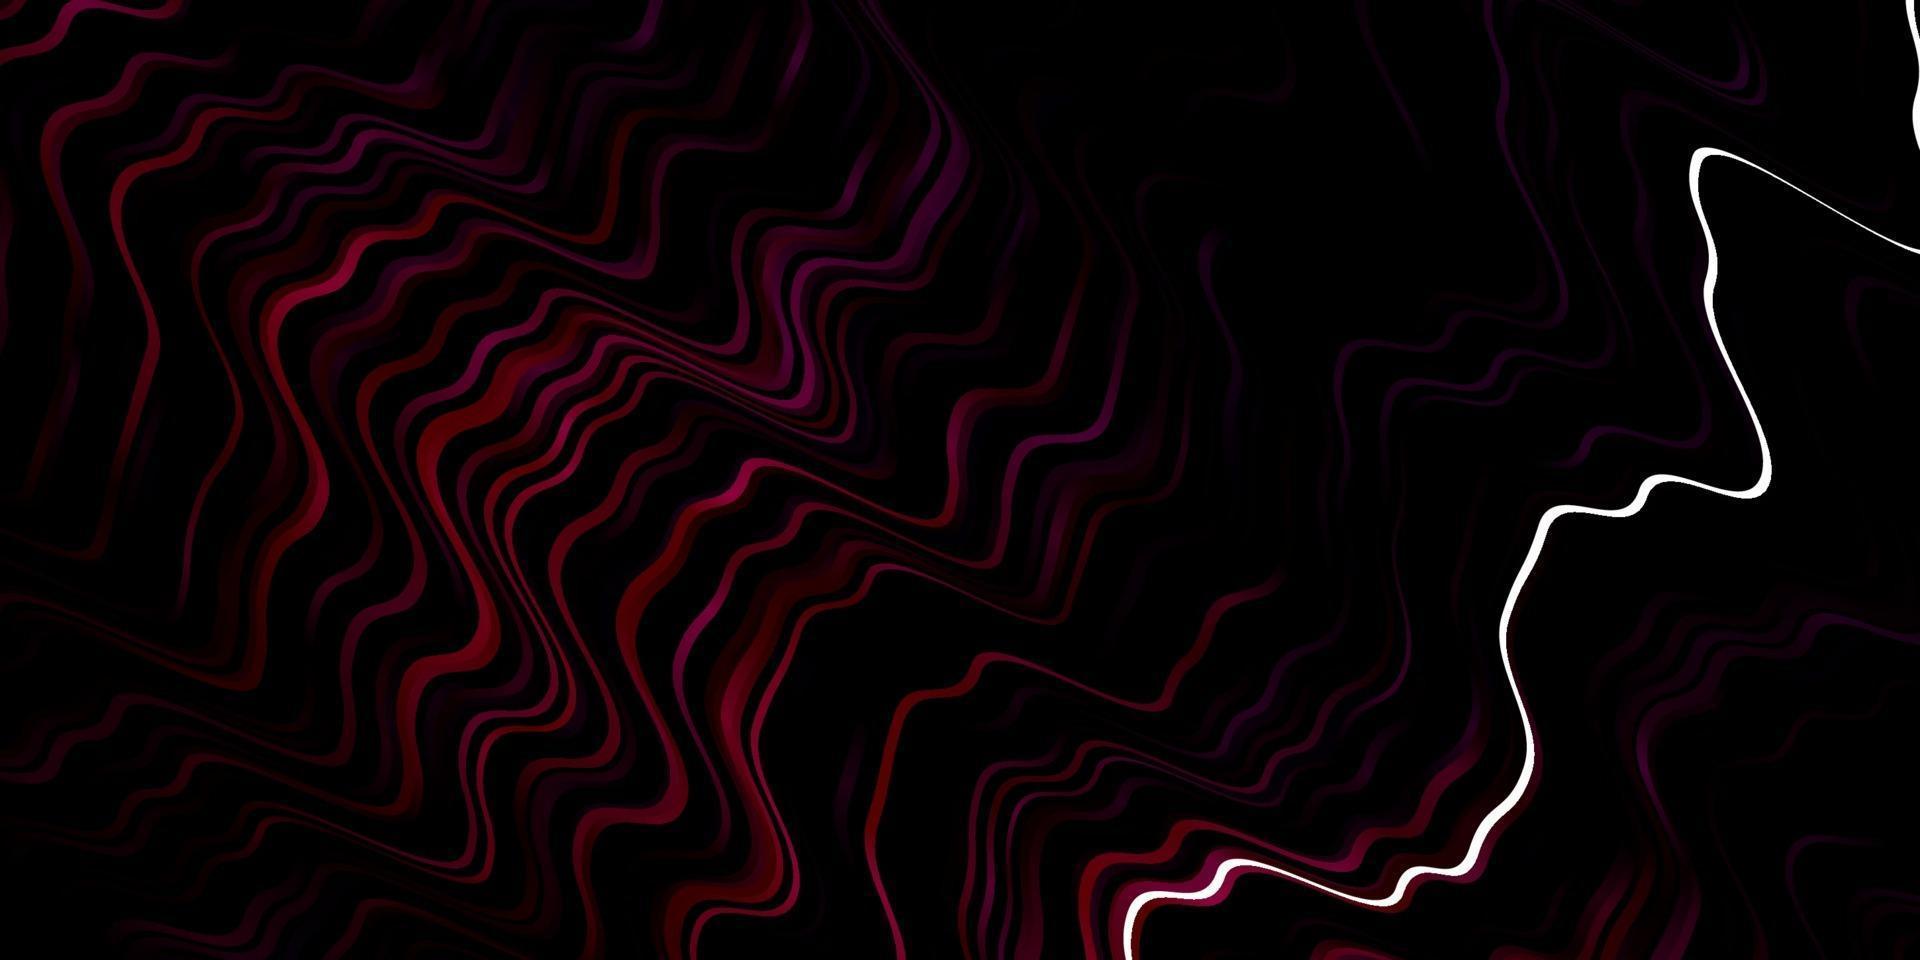 Dark Pink vector pattern with curved lines.